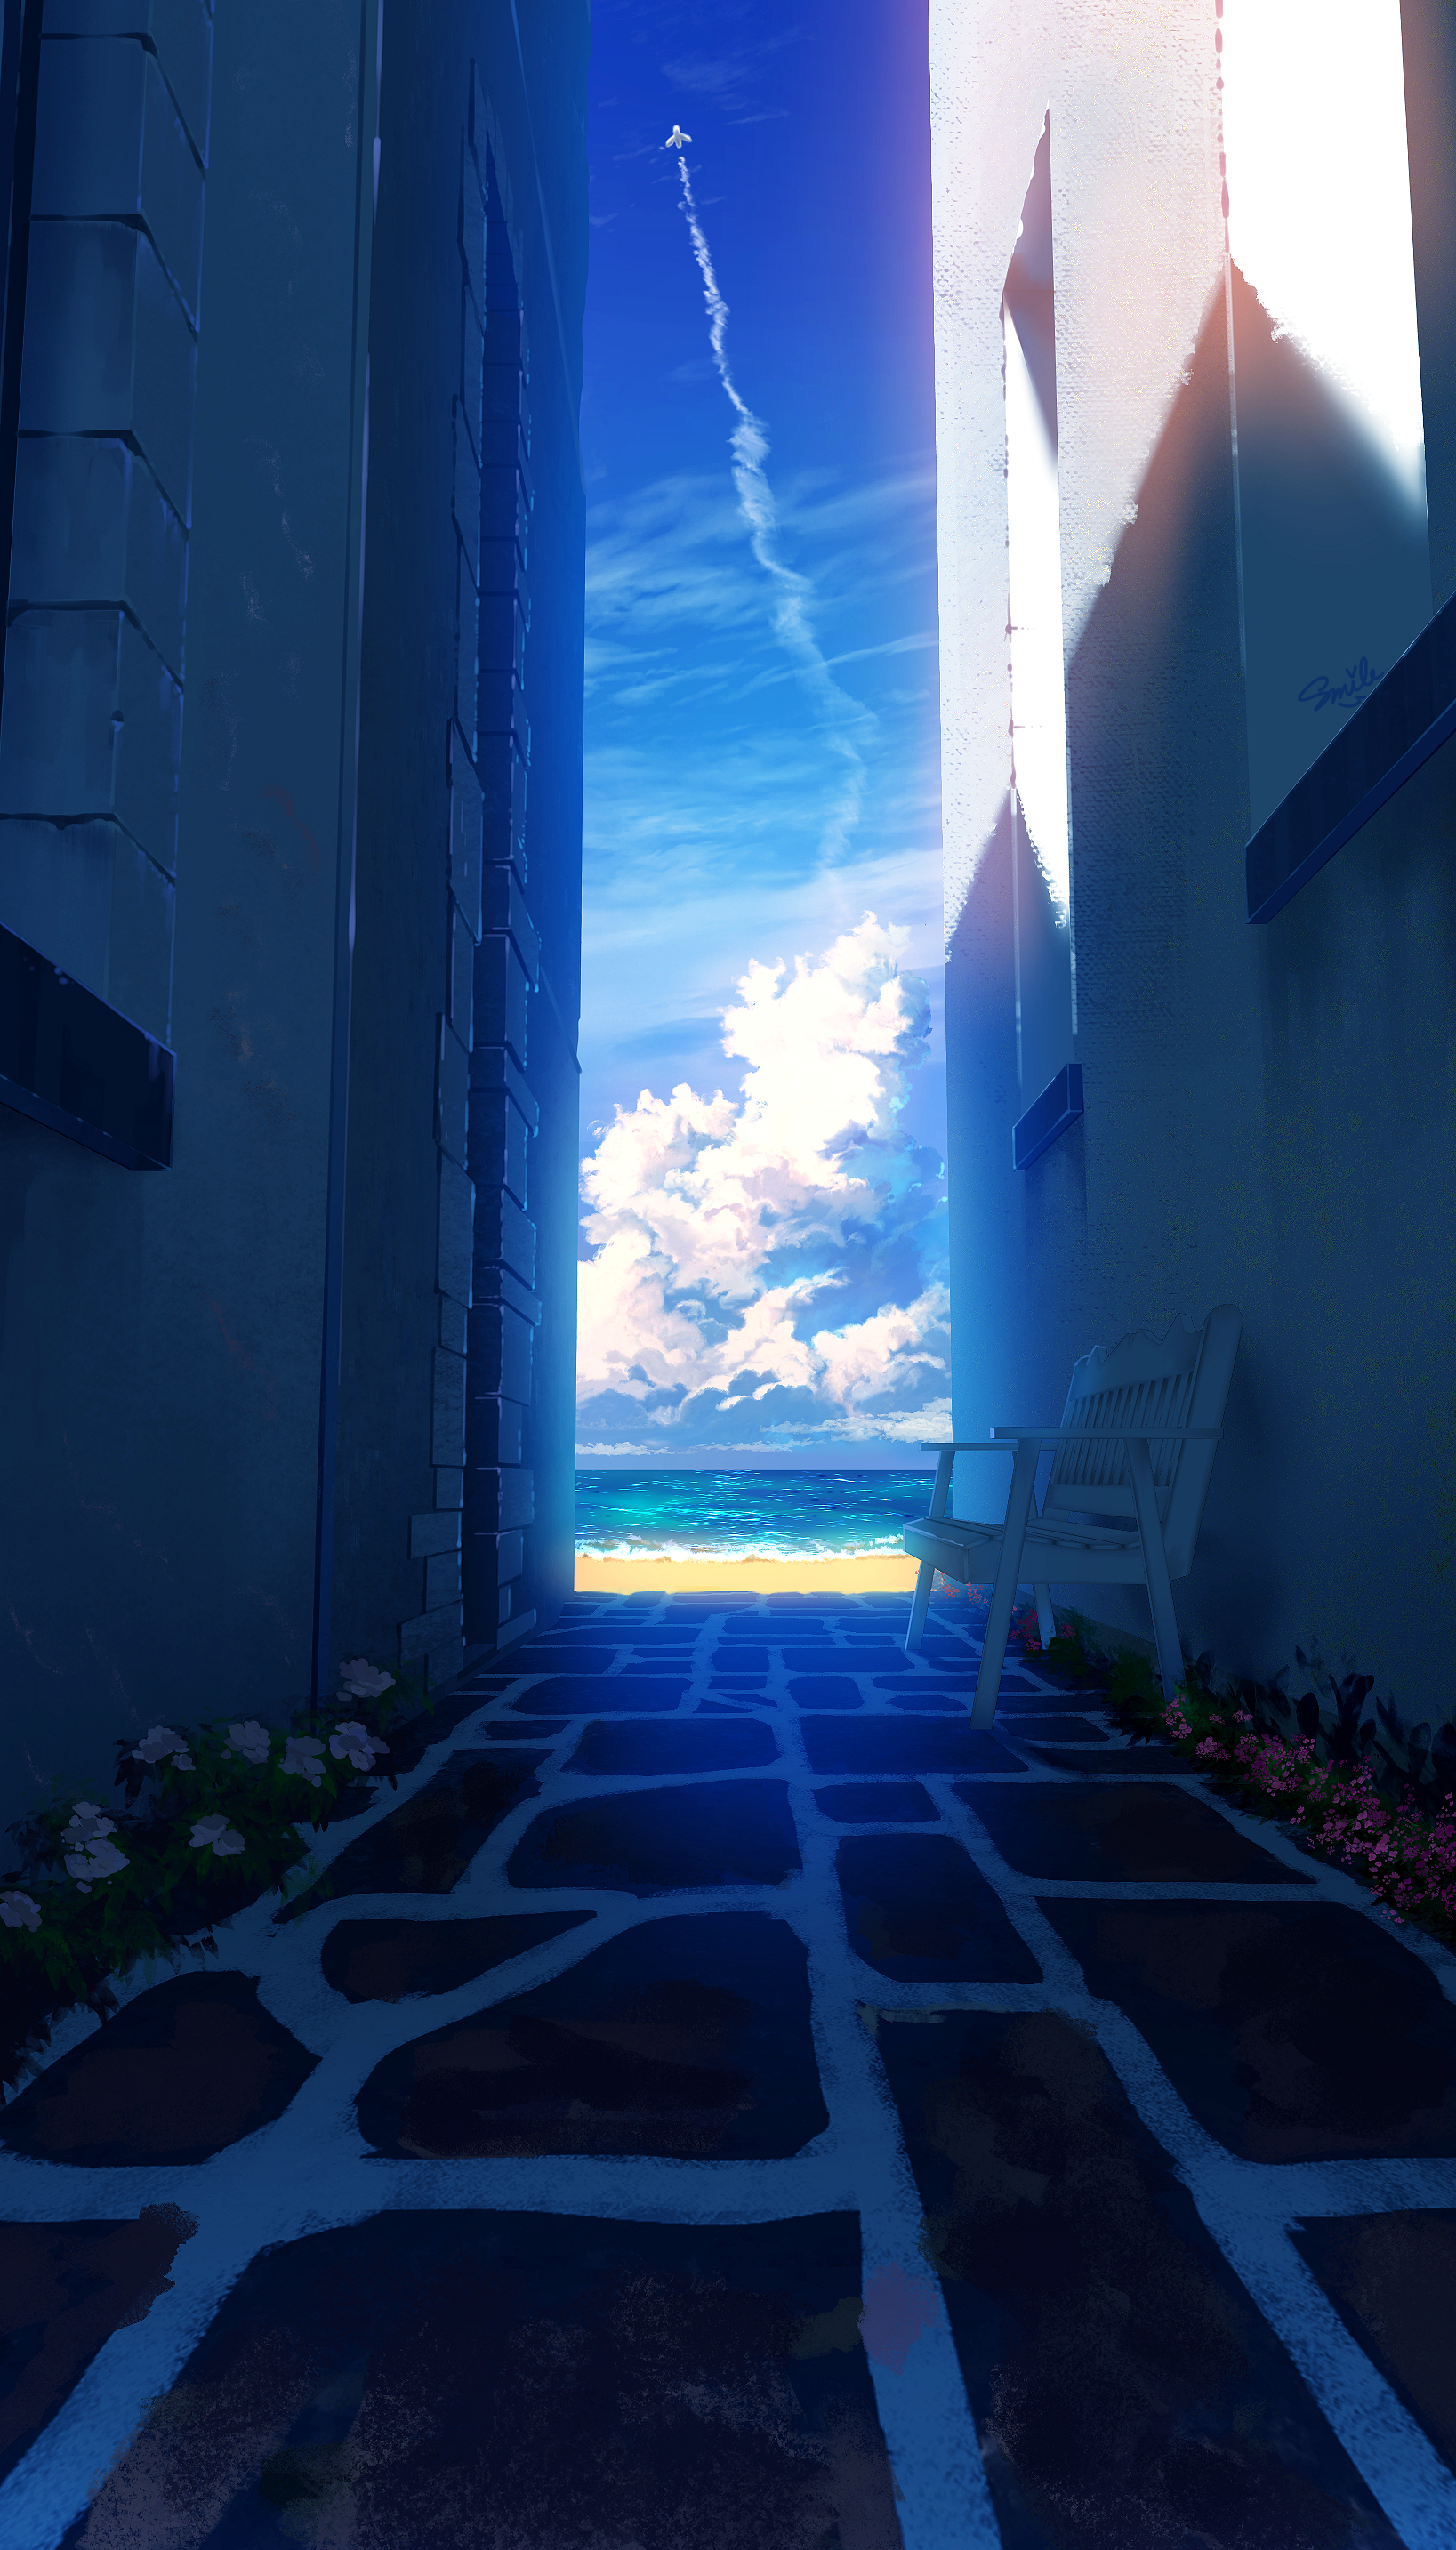 Smile Artist Airplane Aircraft White Flowers Bench Alleyway Sky Clouds Sea Flowers Outdoors Pink Flo 1637x2867